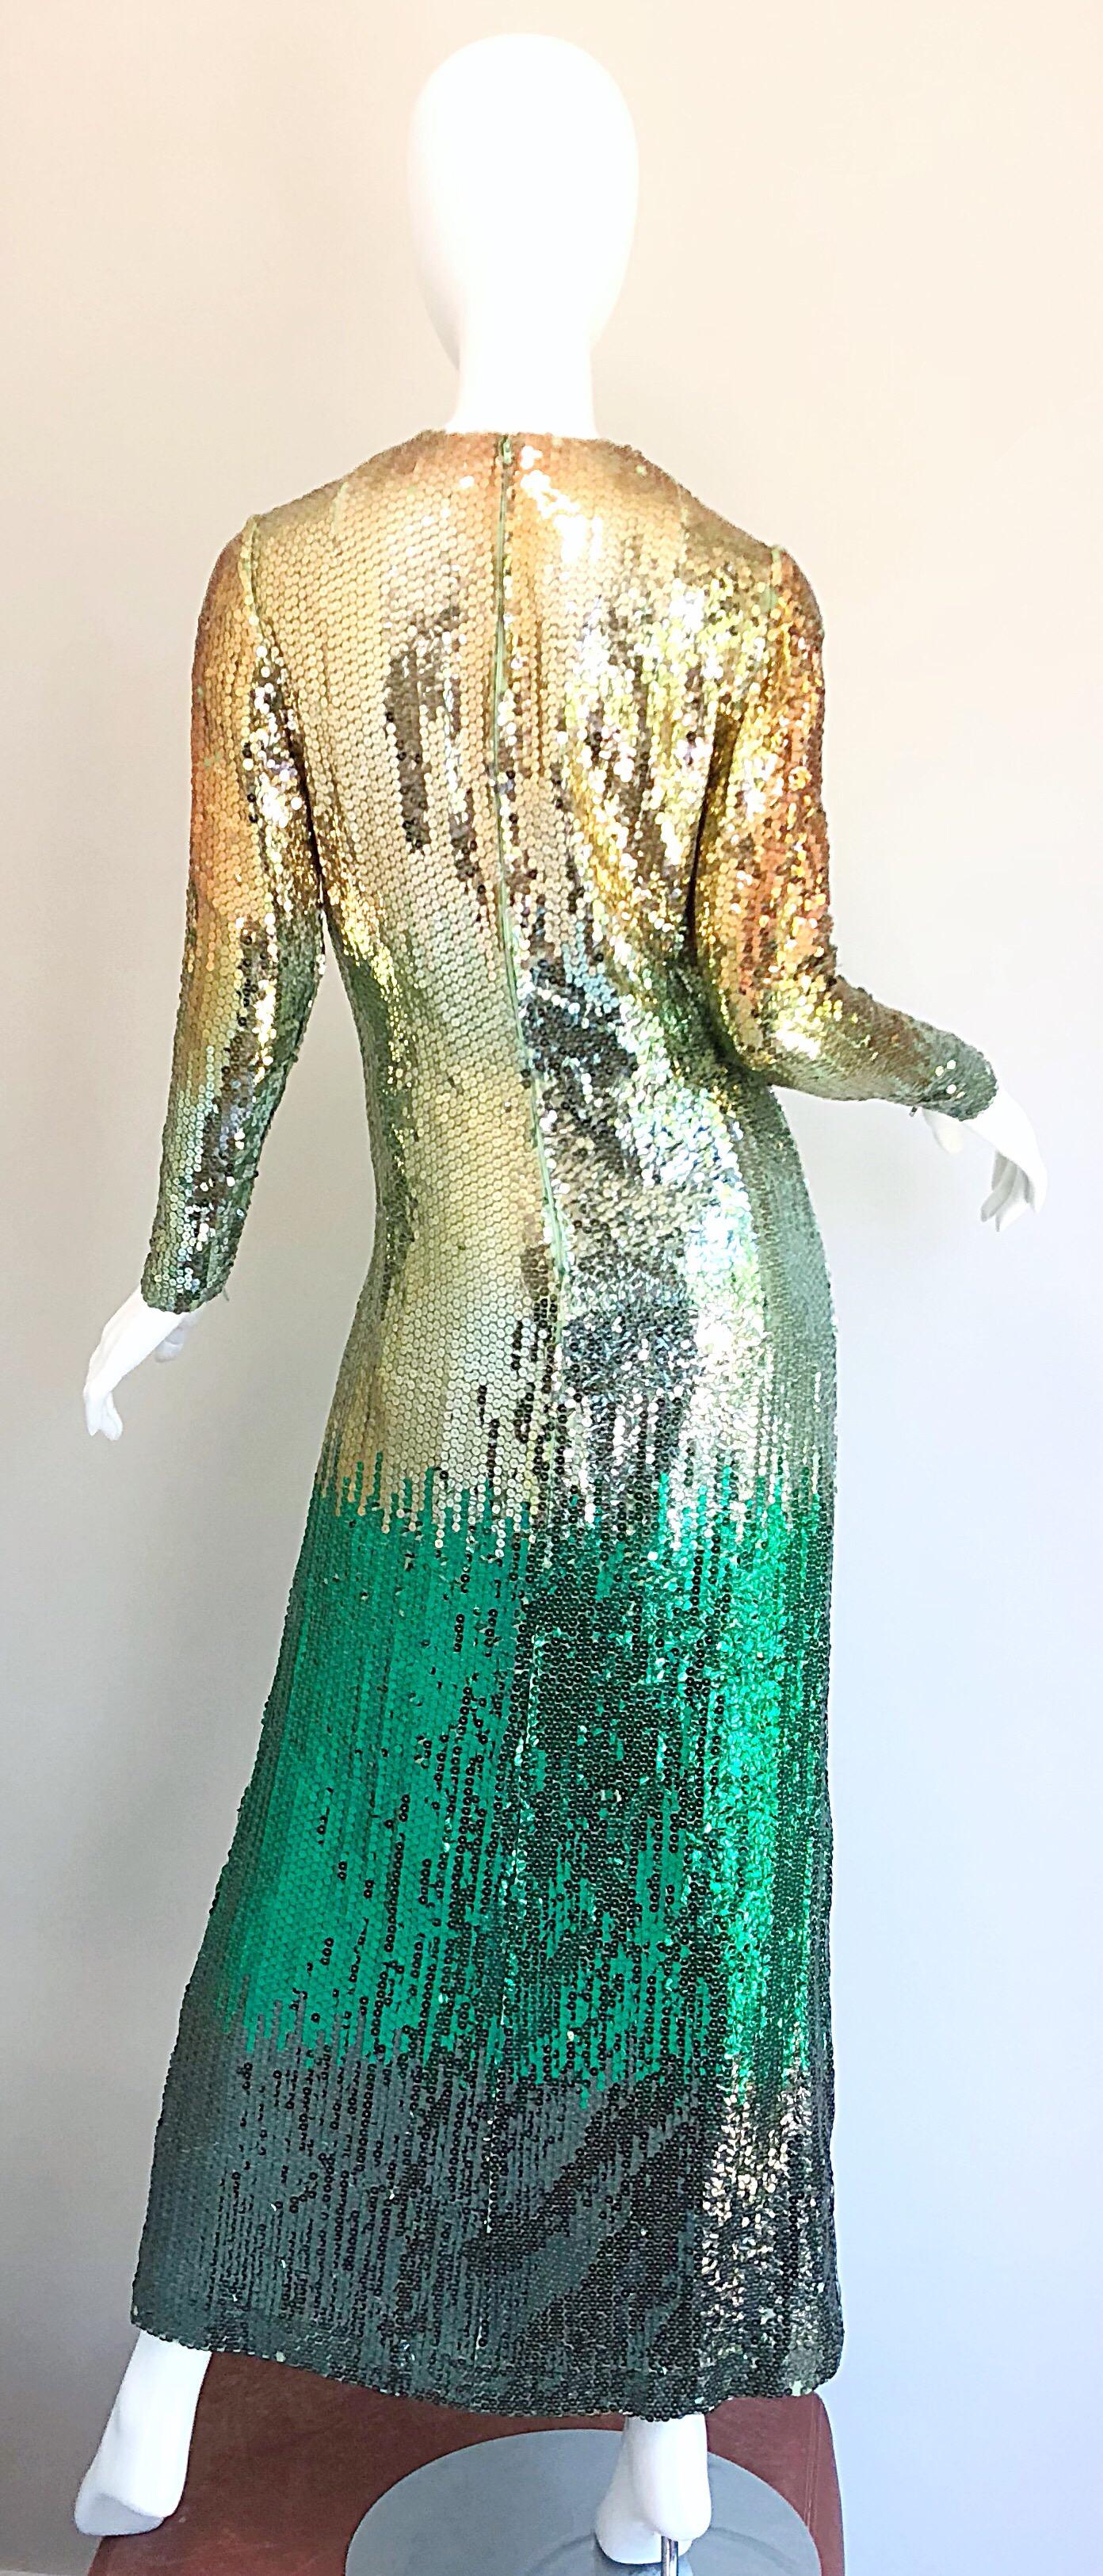 Women's Amazing 1960s Bill Blass Gold + Green Ombre Sequined Vintage 60s Gown Dress